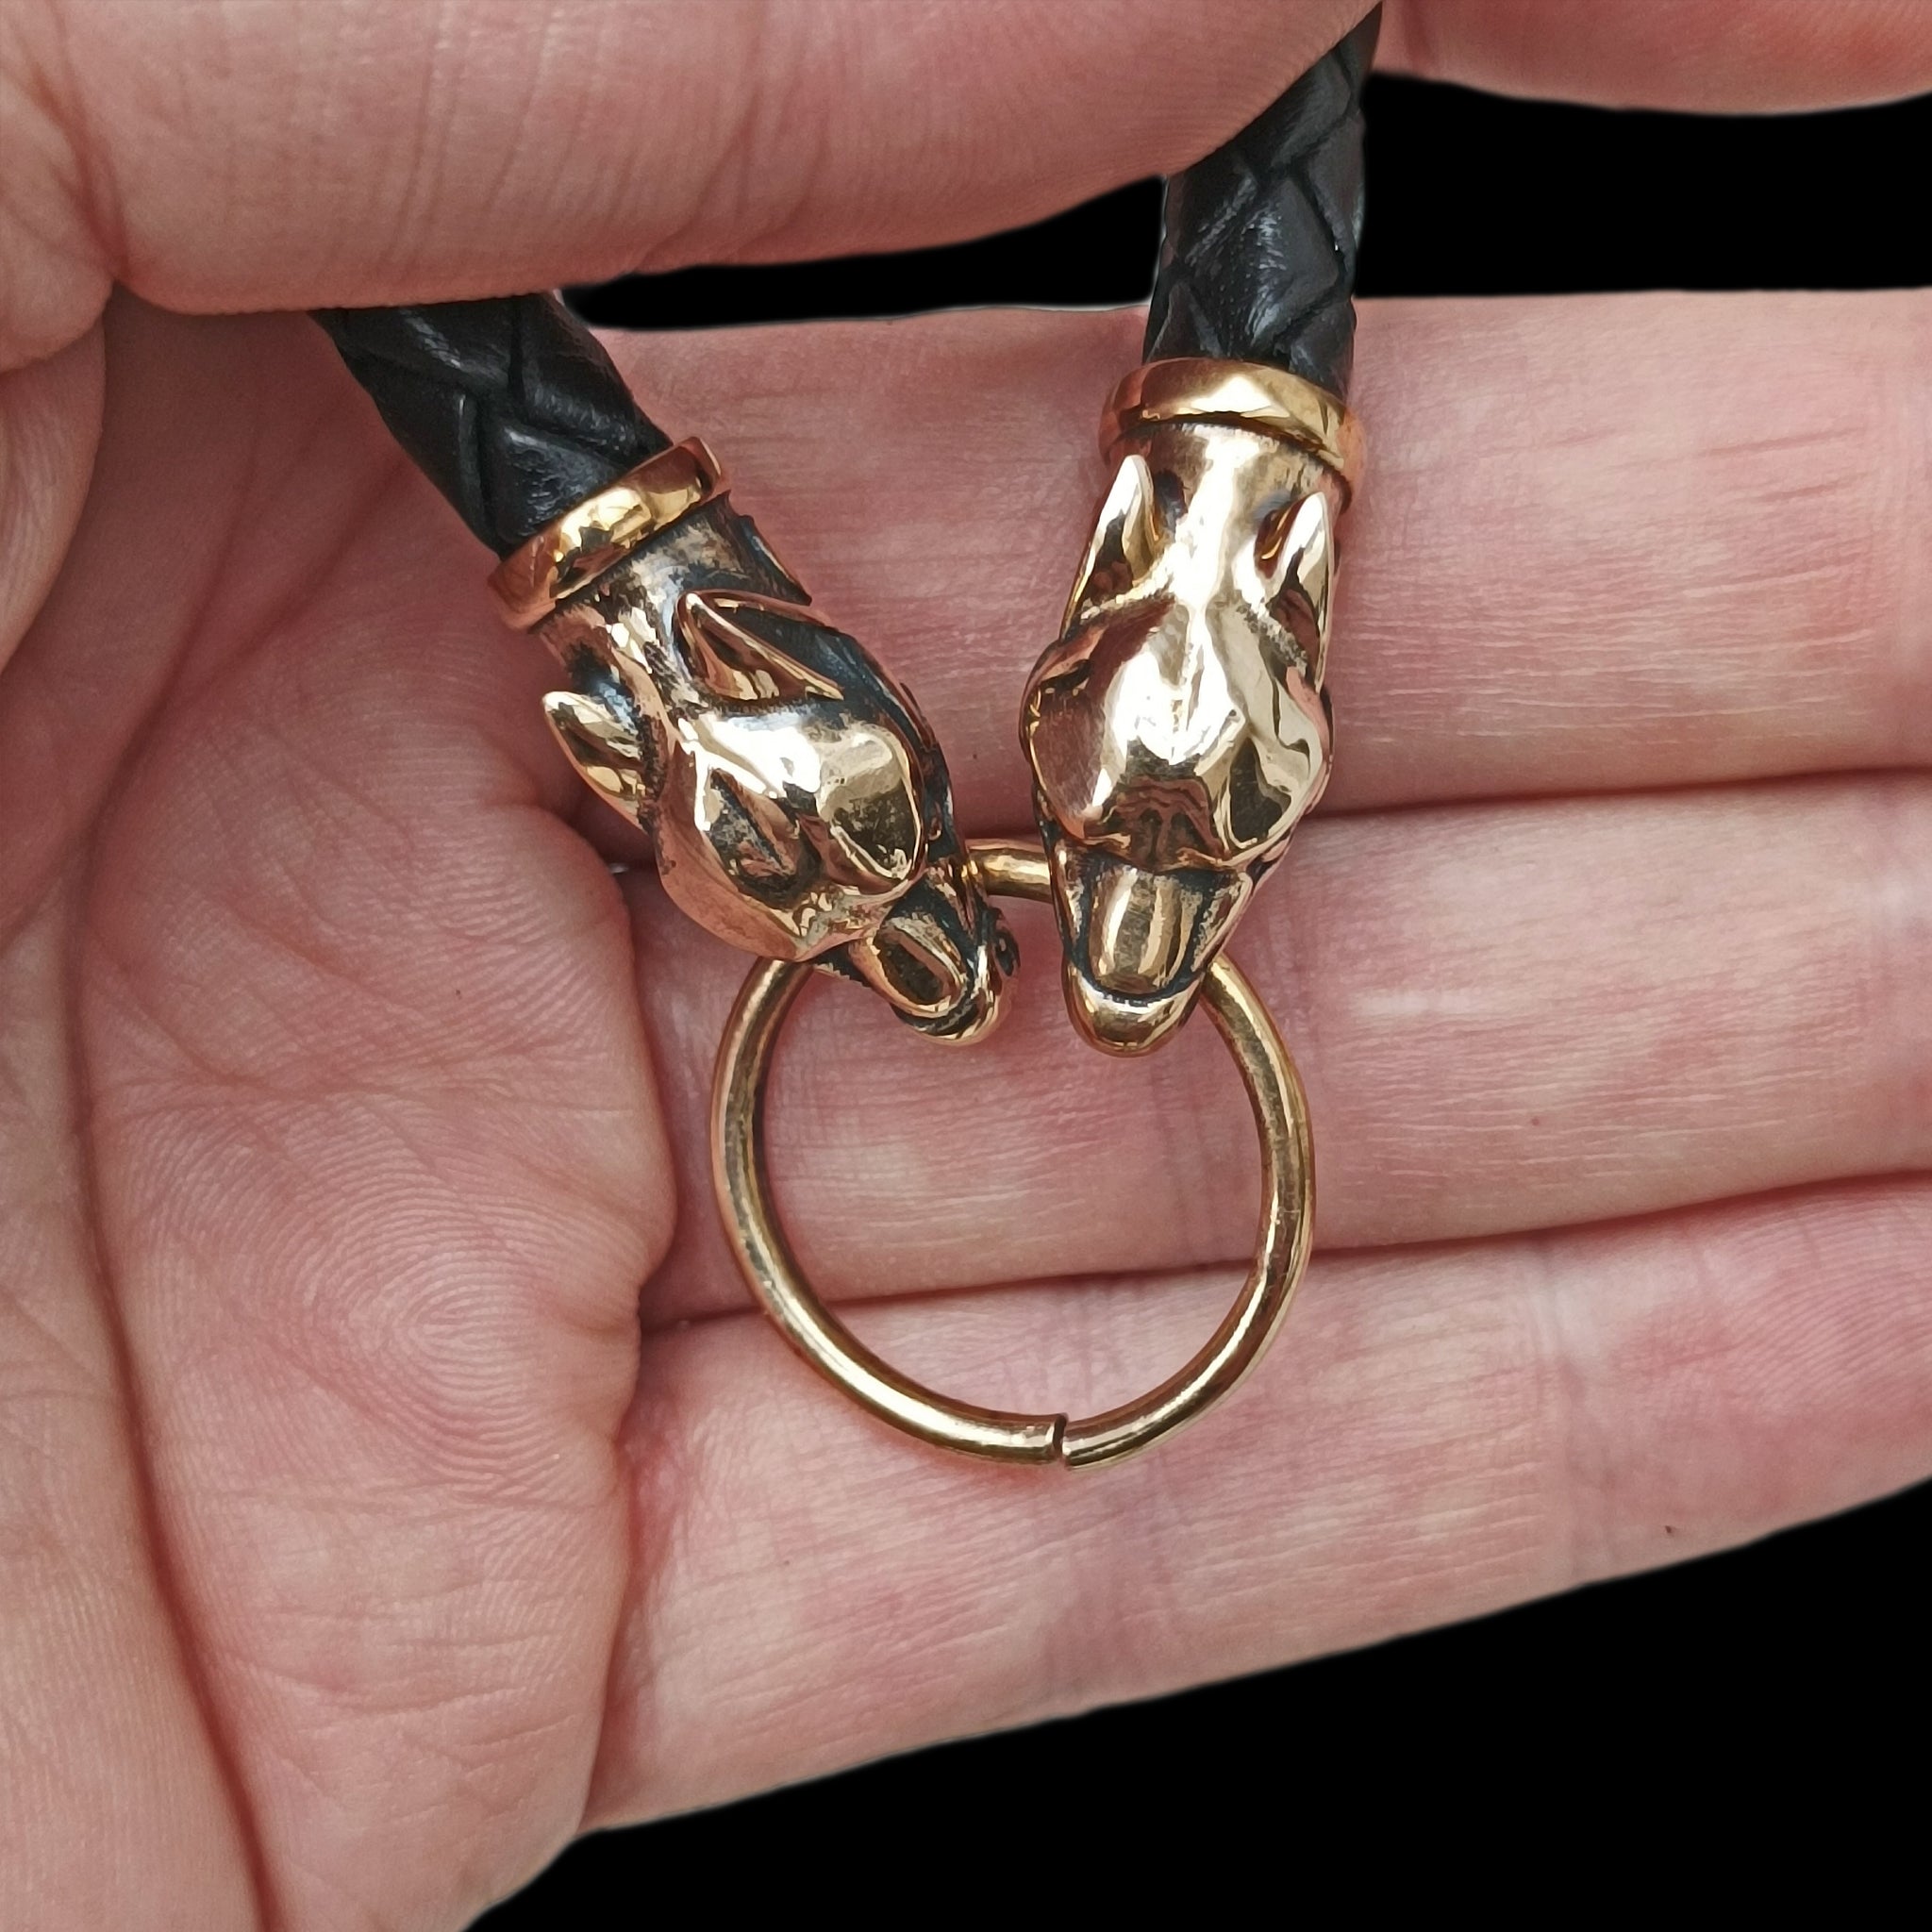 8mm Width Braided Leather Necklace with Bronze Ferocious Wolf Heads and Split Ring in Hand